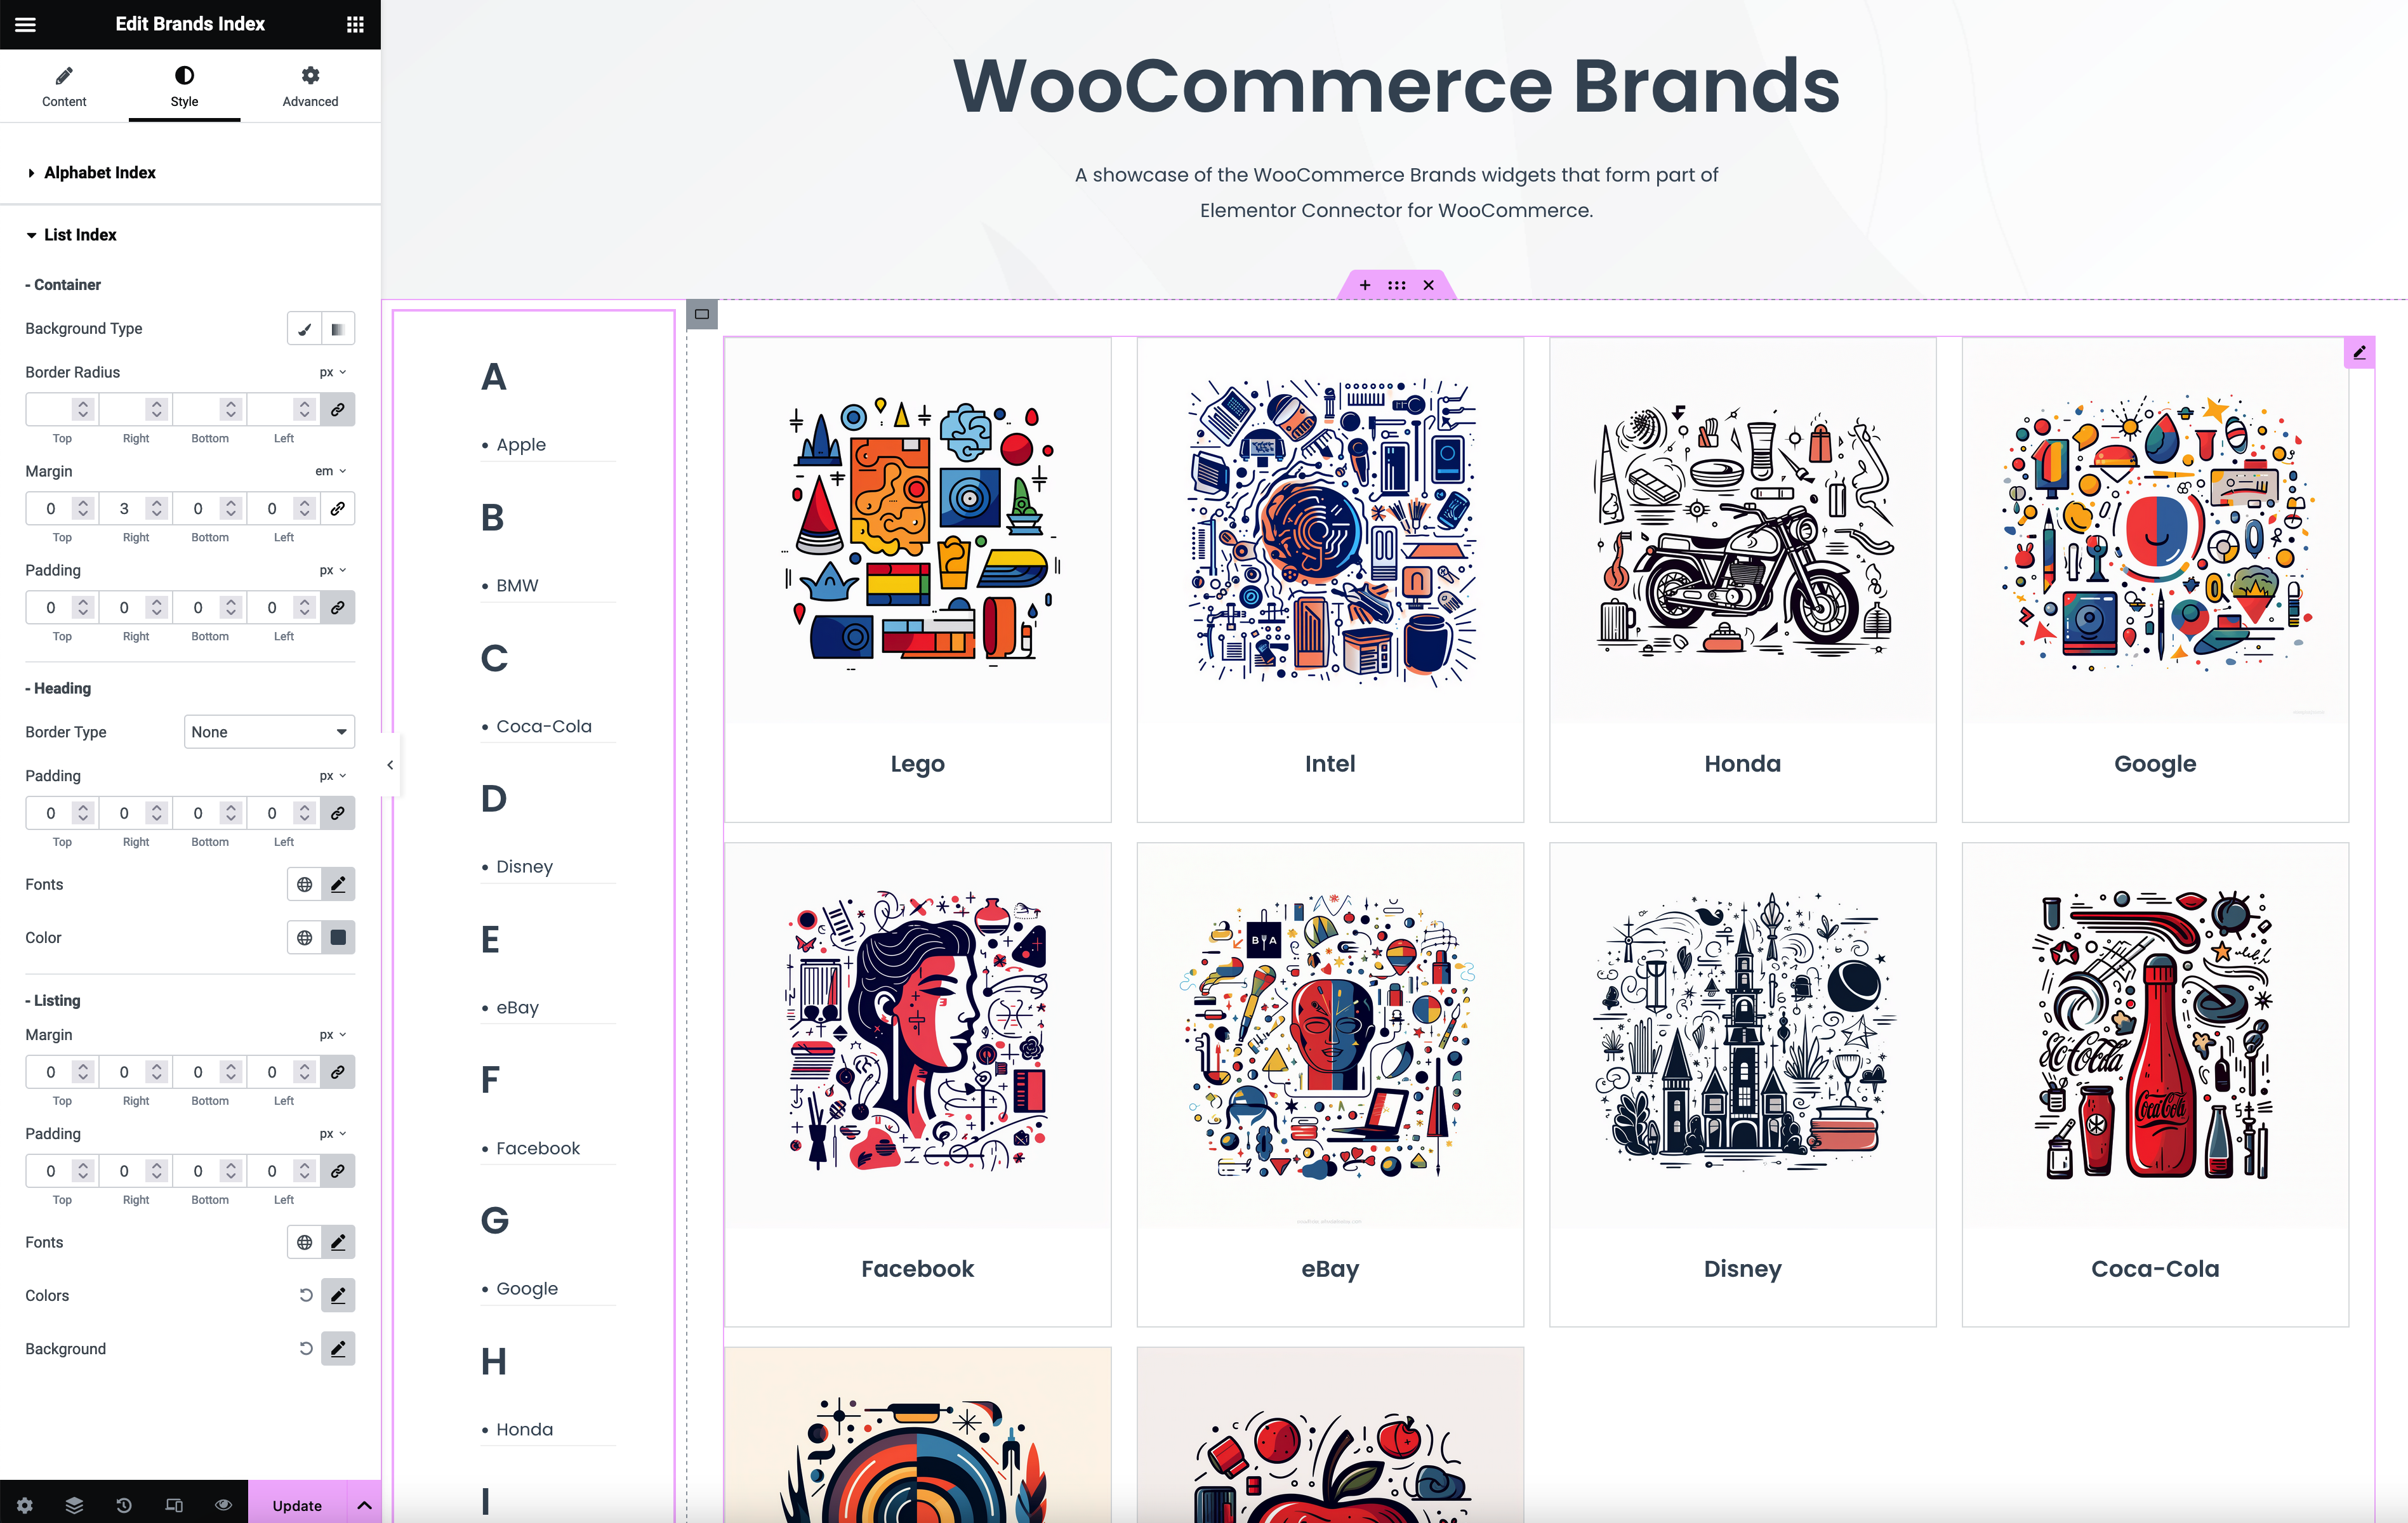 Elementor Connector for WooCommerce Brands - Settings Panel for Brands Index Widget